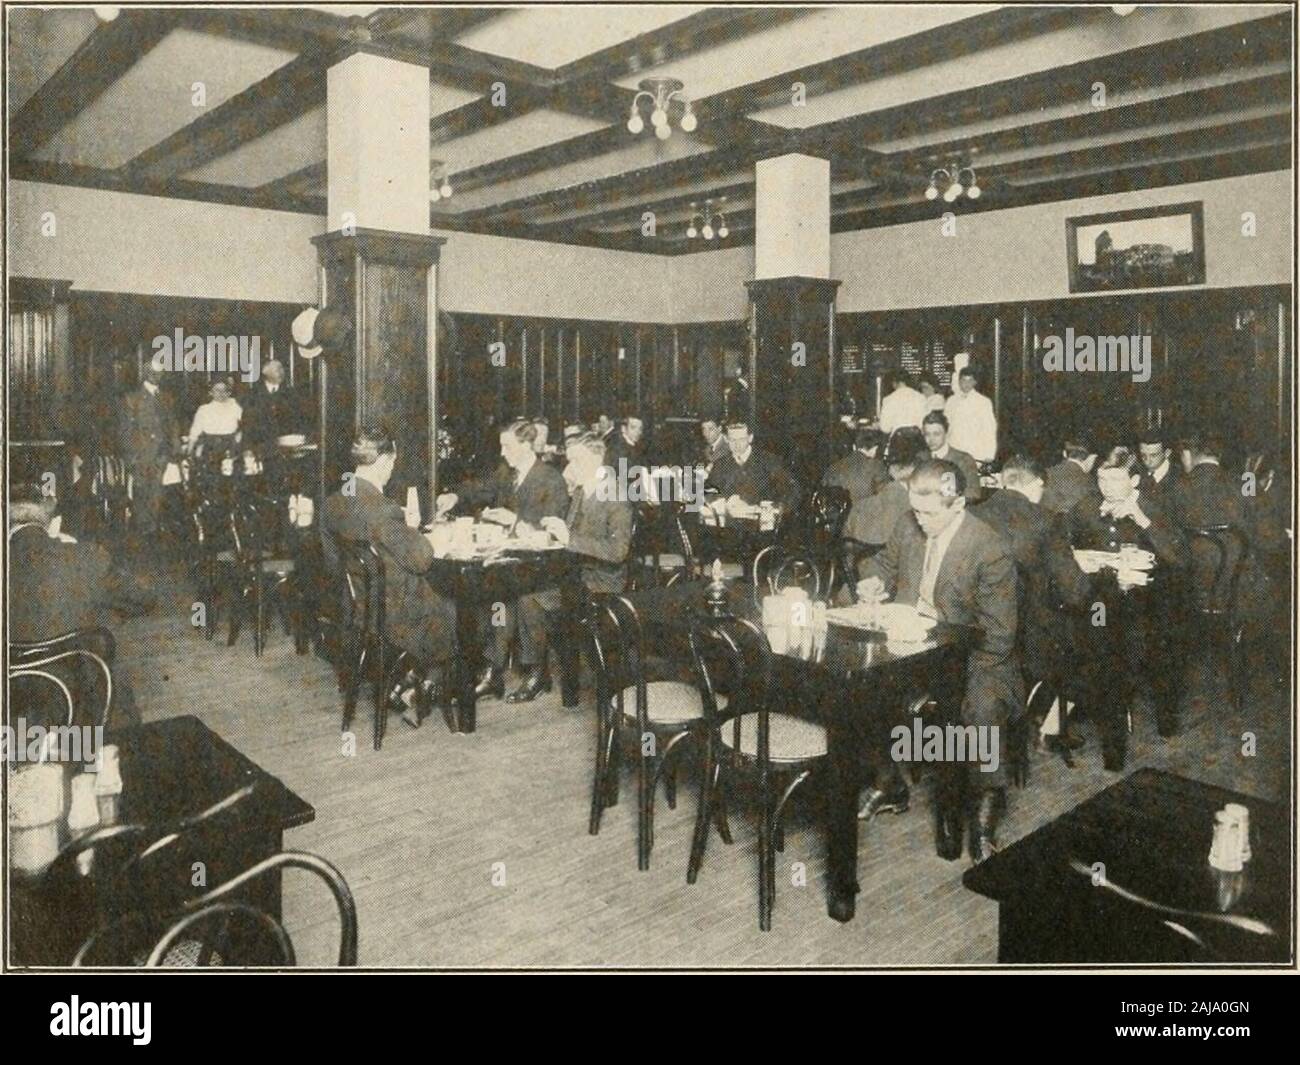 [Course catalog] . Billiard Room. Restaurant Discipline One reason why the students of the school are able to prog-ress rapidly is that no time is wasted in obtaining disciphne.Our students are men who are sacrificing time and money foran education, and they are in earnest. Not since the schoolhas been founded has it been found necessary to expel or evensuspend a student. Our teachers use the entire recitationperiod for instruction. The work is not retarded by frequentrequests for attention. Students Tickets Students residing in suburban towns may, on nearly all rail-roads, travel to and from Stock Photo